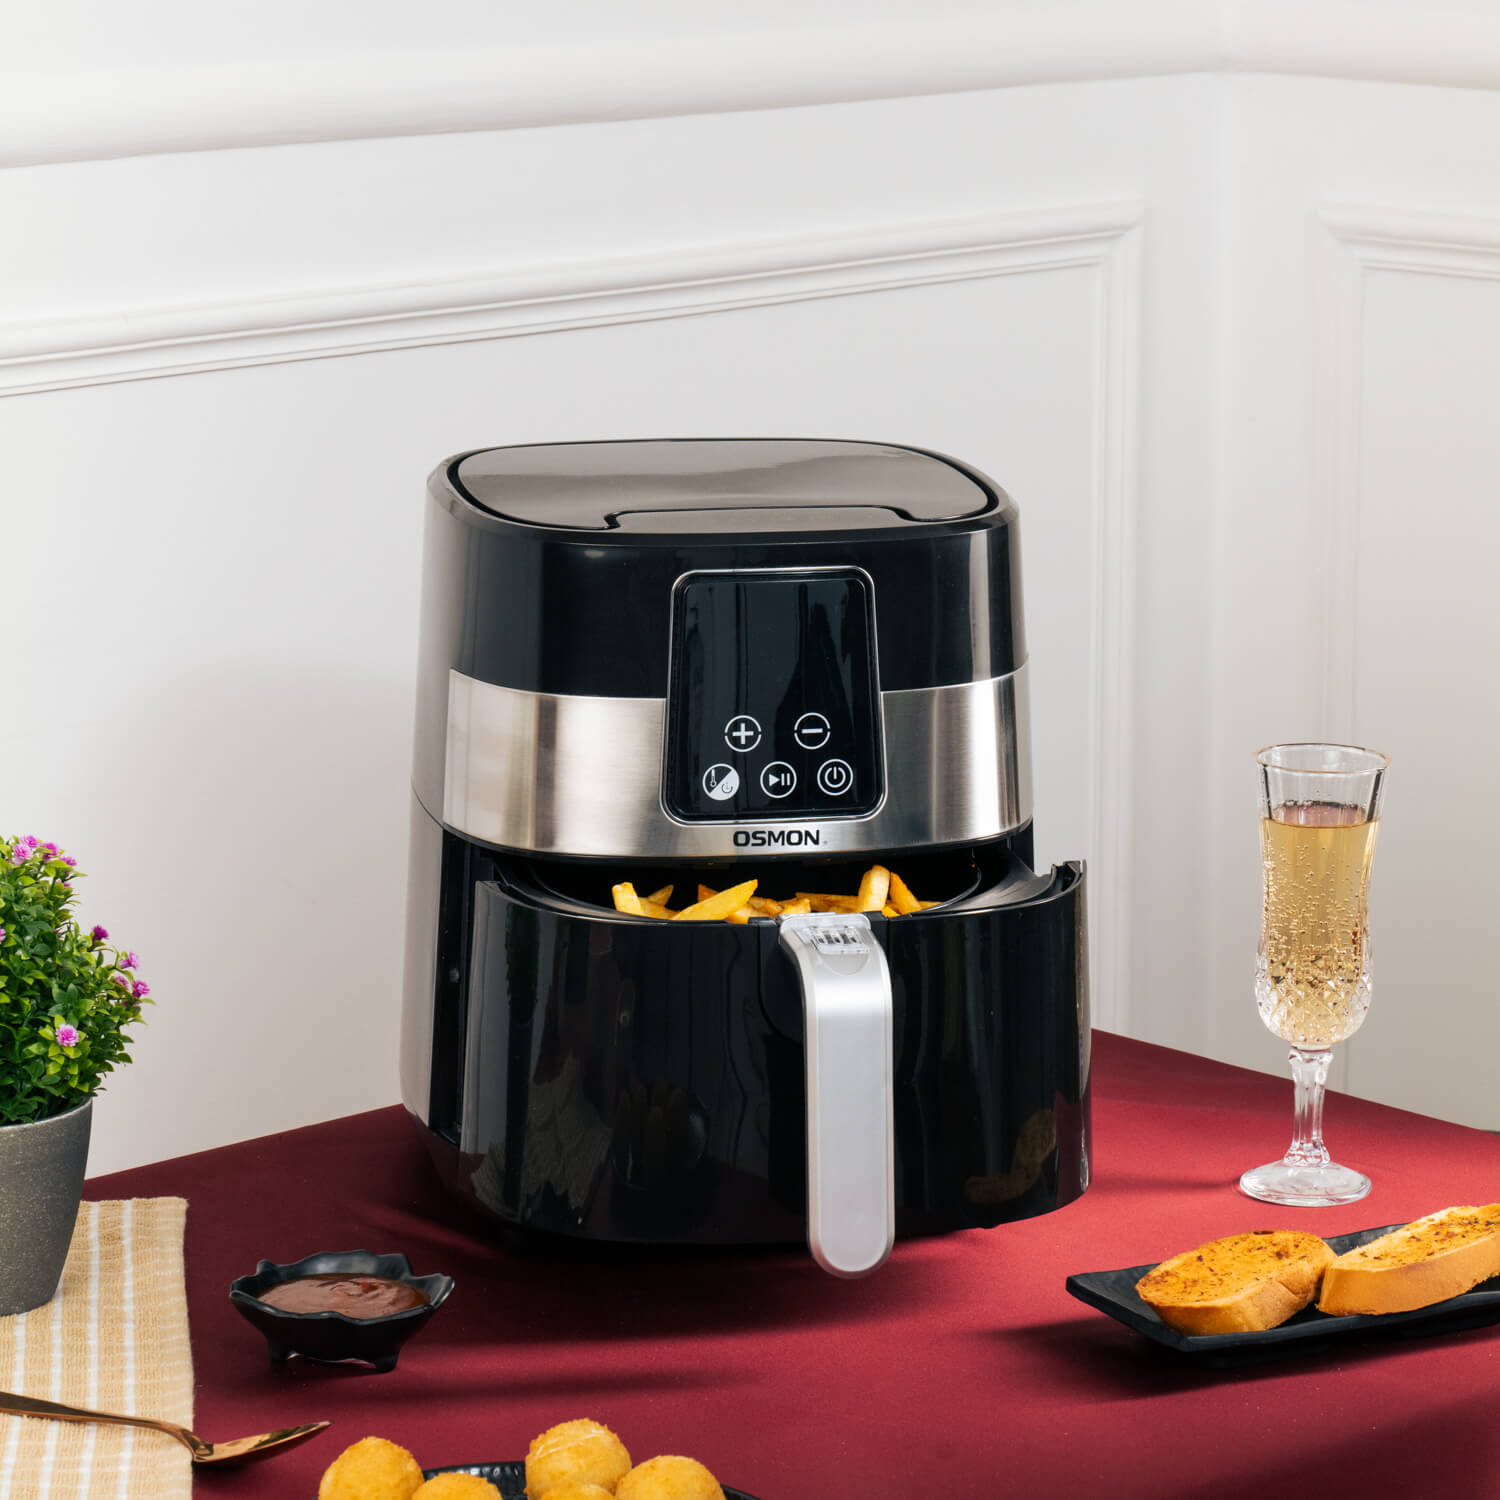 Showcasing 4 Ltr Air fryer with silver & black colour having fries in its 3.2 Ltr basket